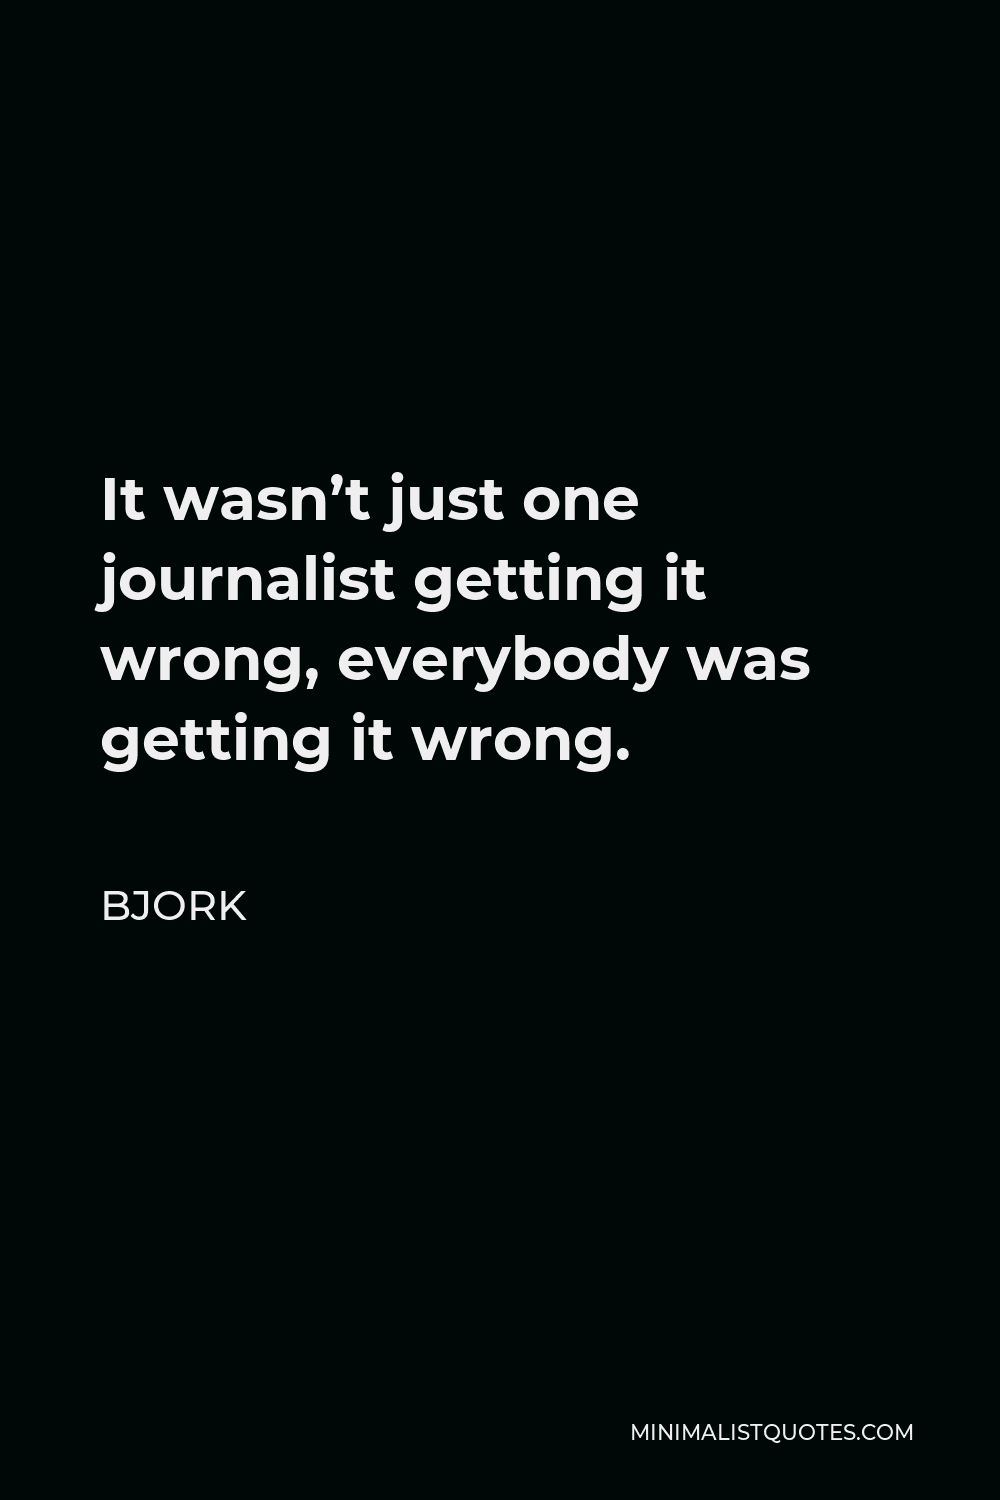 Bjork Quote - It wasn’t just one journalist getting it wrong, everybody was getting it wrong.